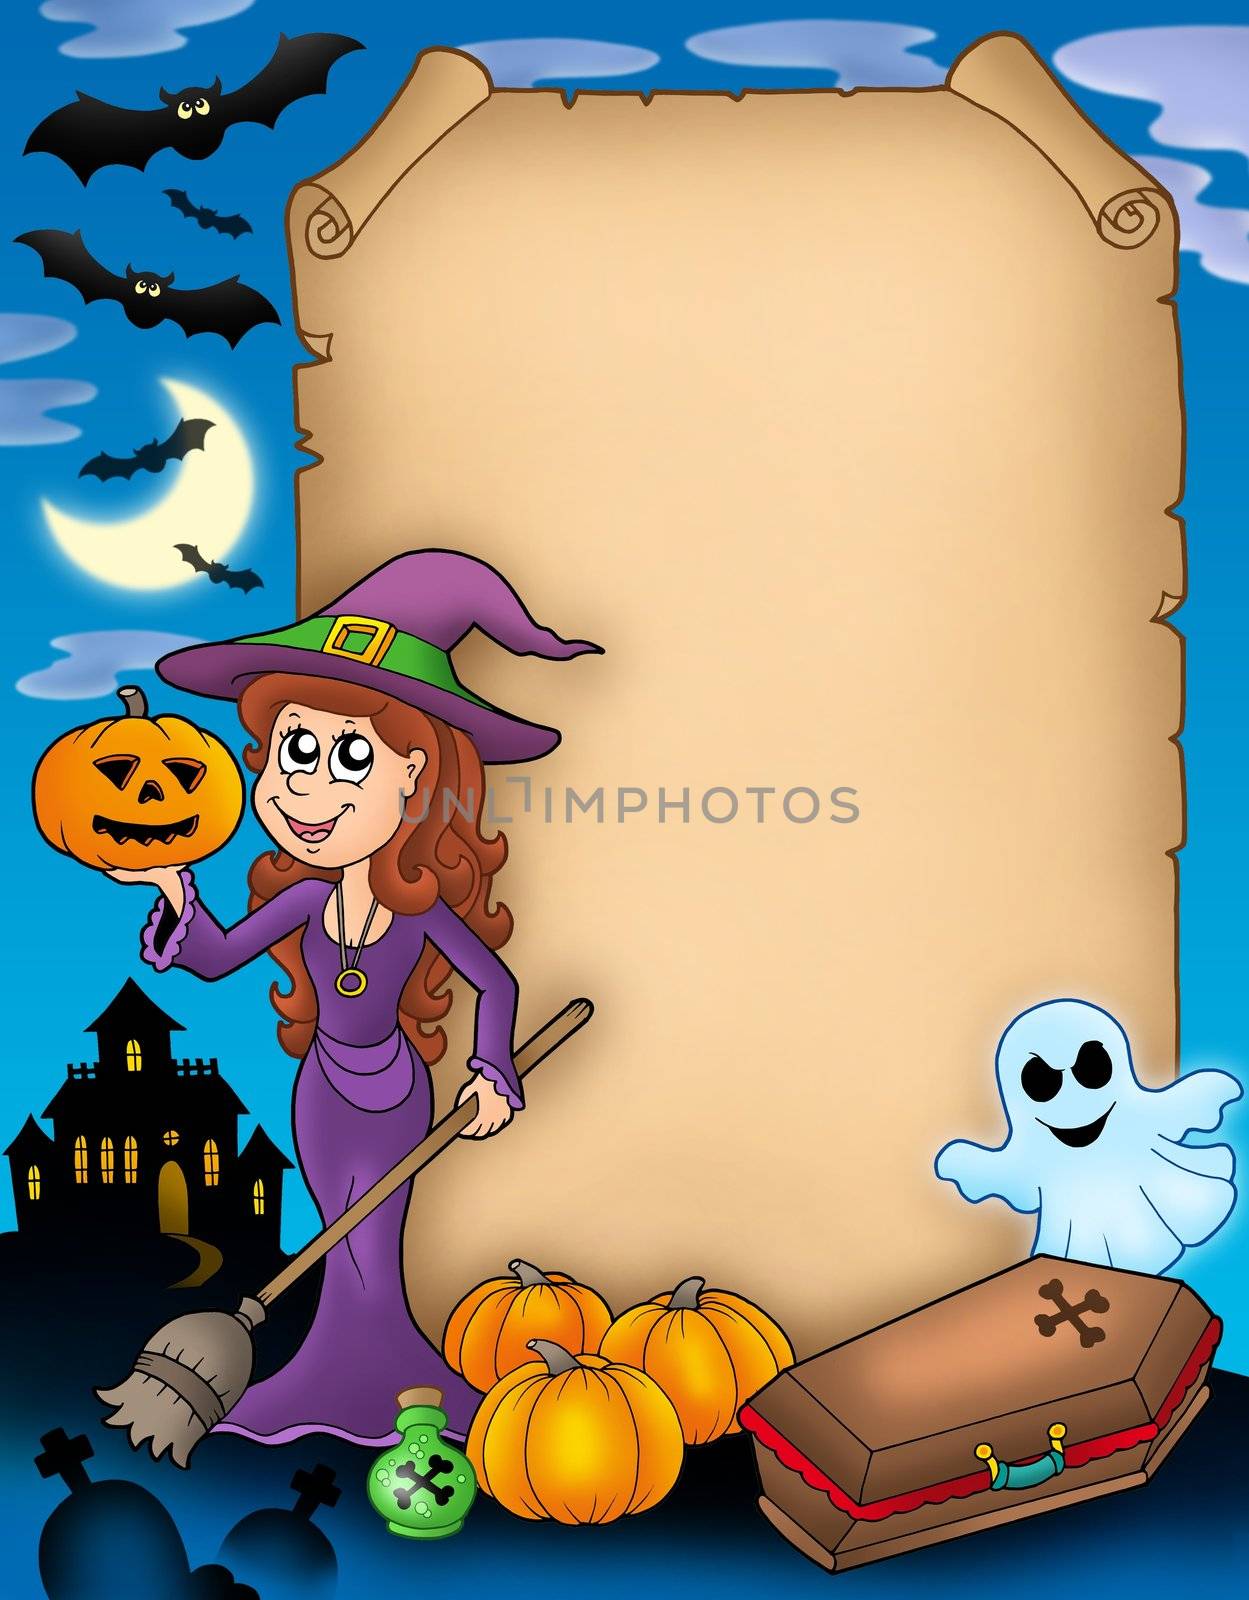 Halloween parchment 4 with various objects - color illustration.